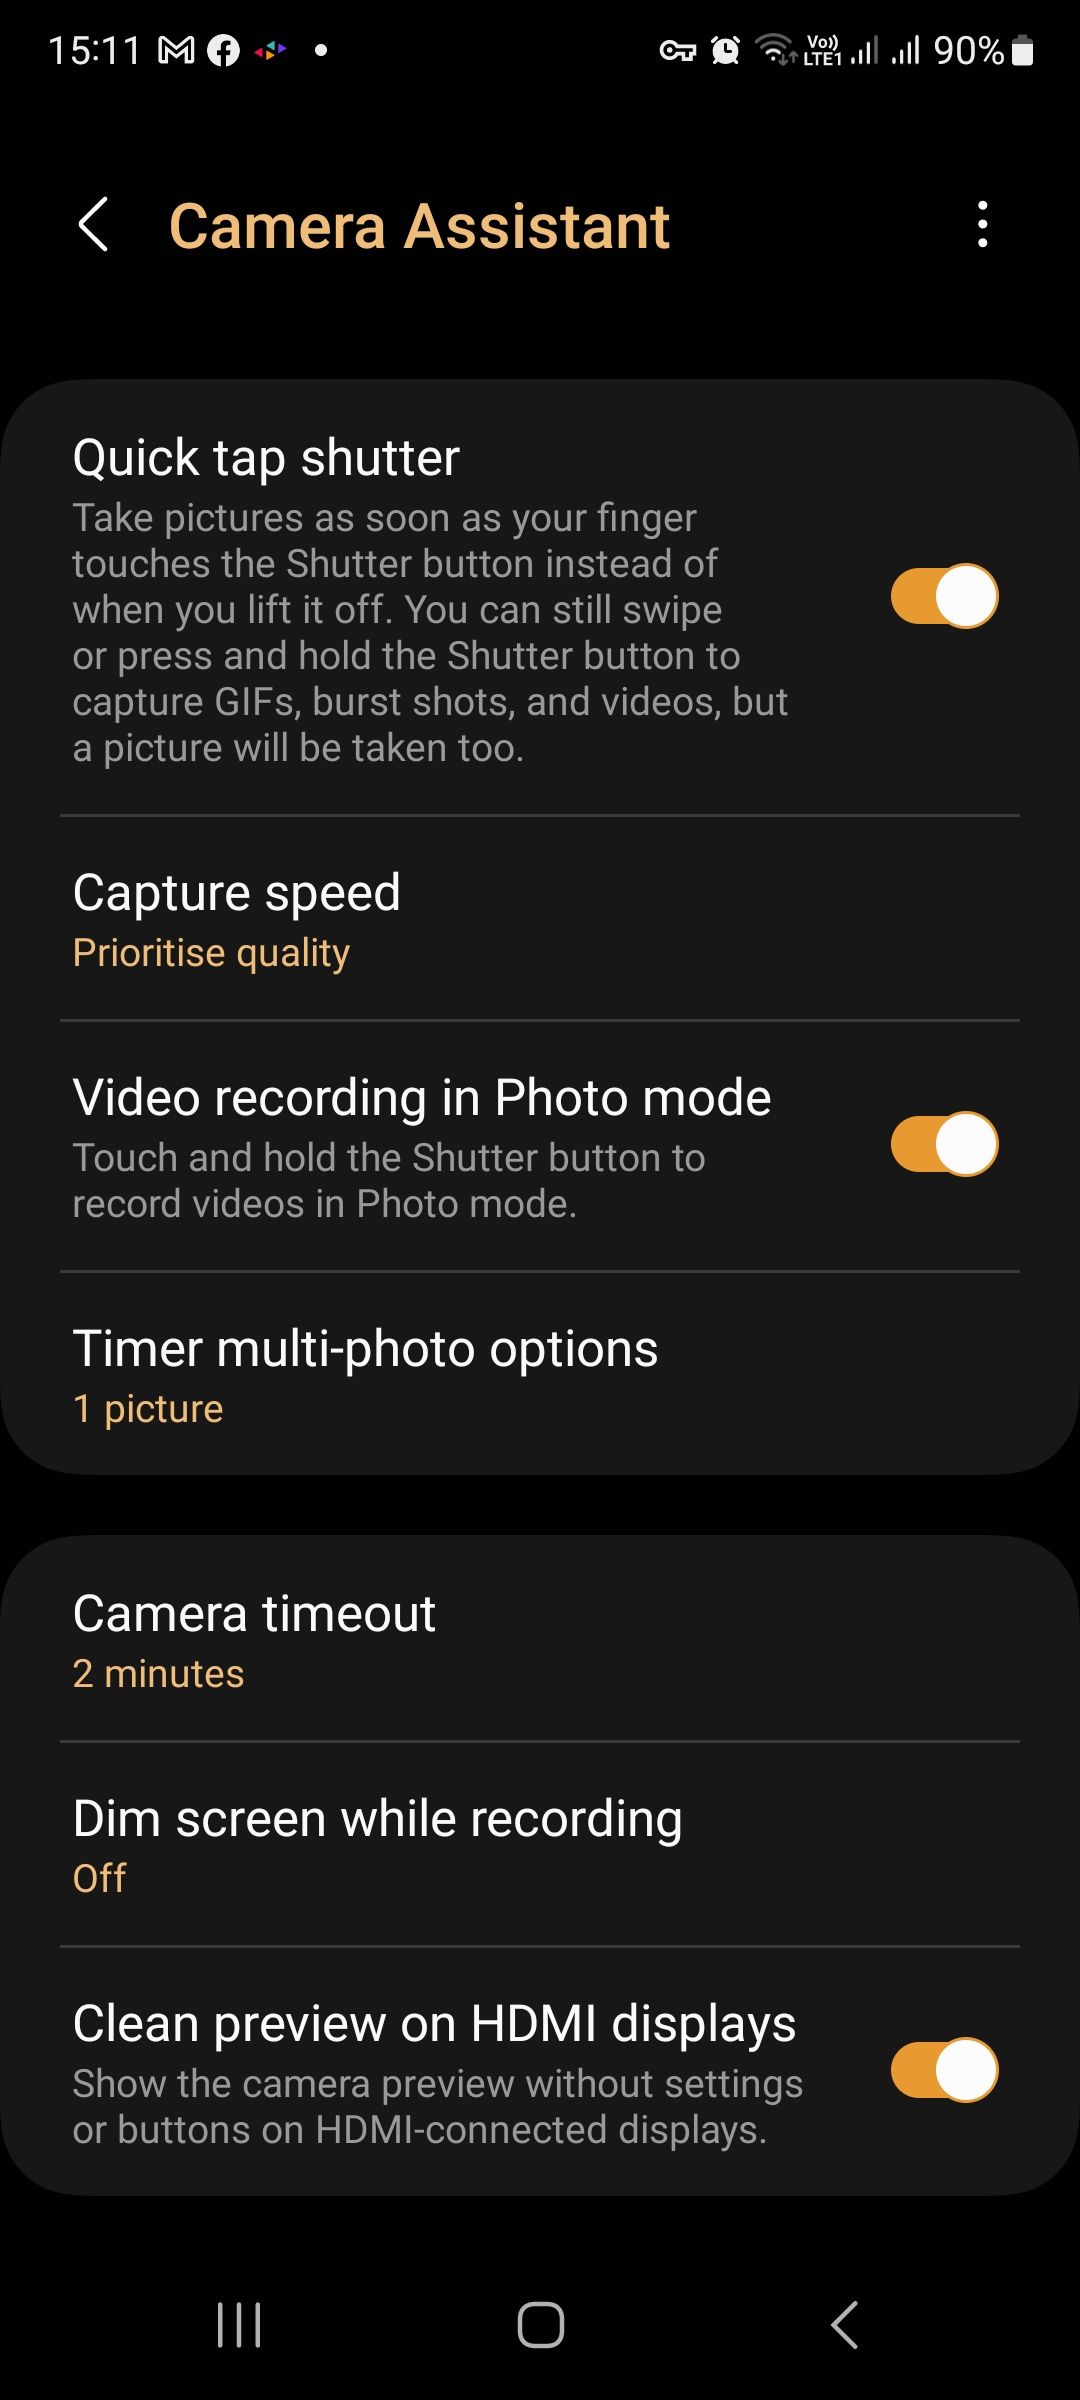 the camera assistant quick tap shutter option